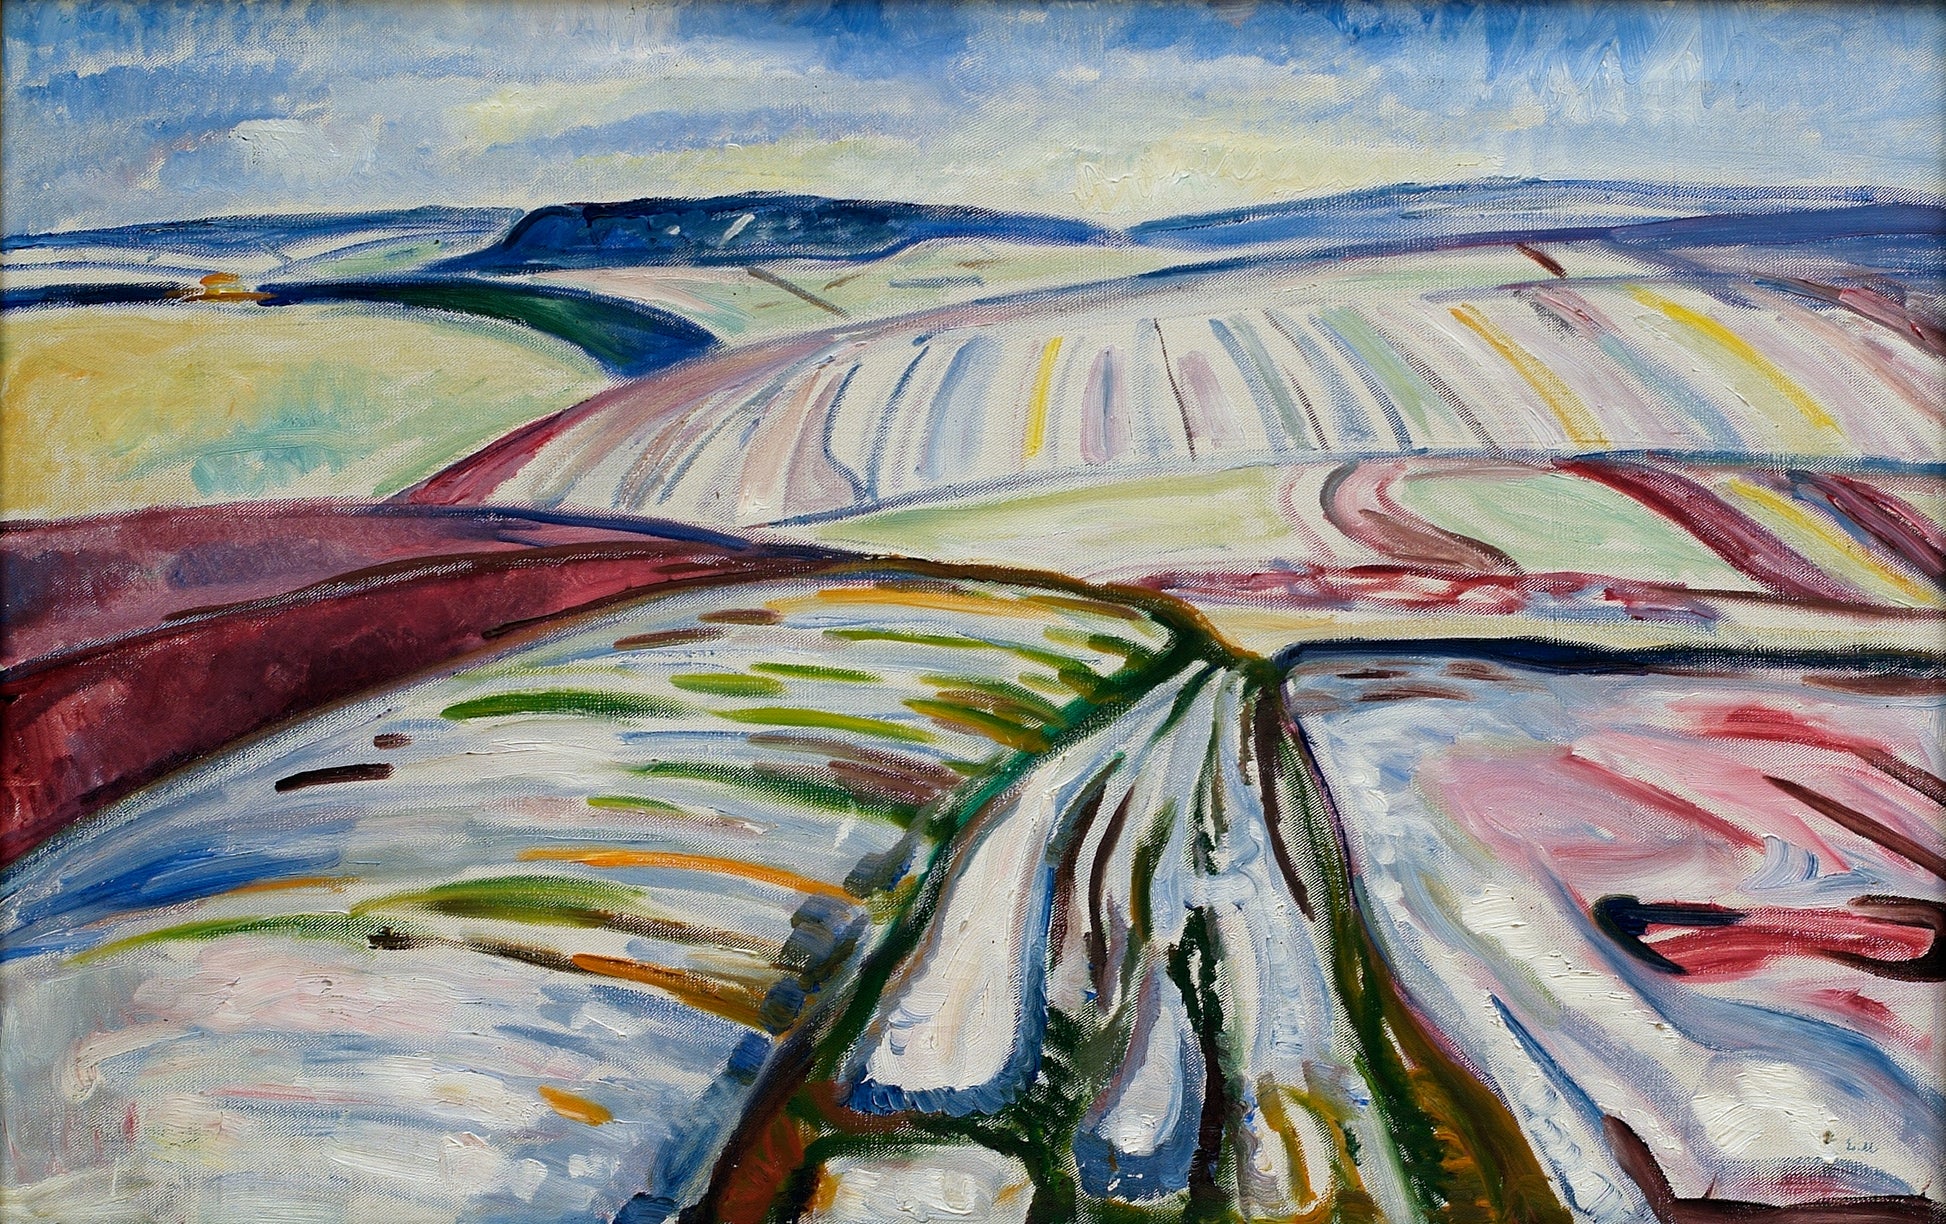 EDVARD MUNCH - FIELD IN SNOW (1907) - CLASSIC MATTE POSTER 